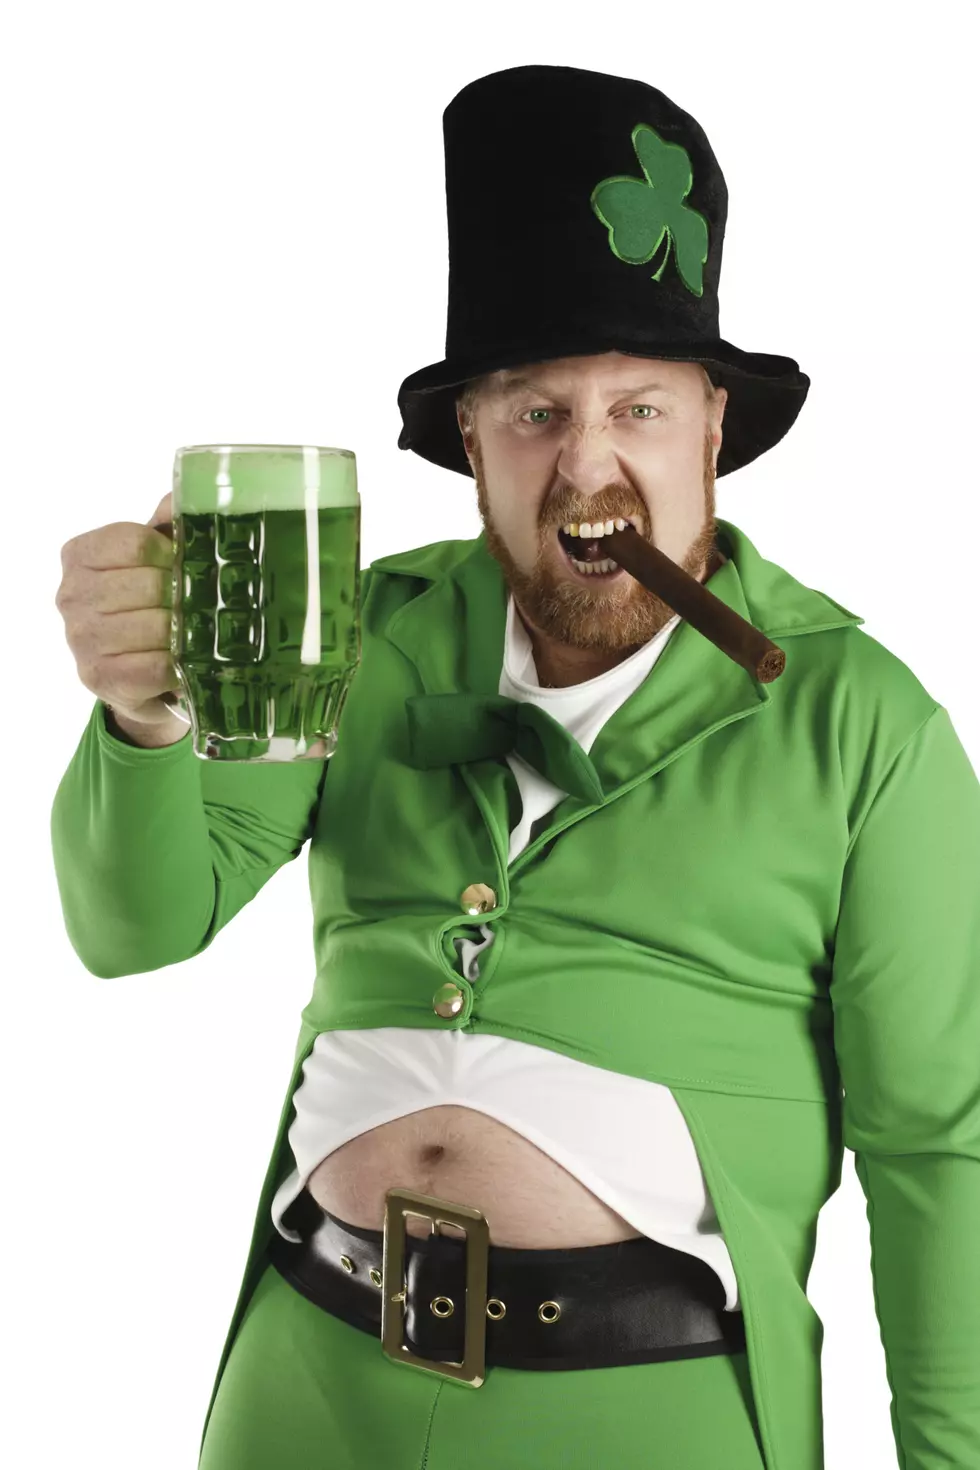 Songs You Must Hear On St. Patrick’s Day [VIDEO]